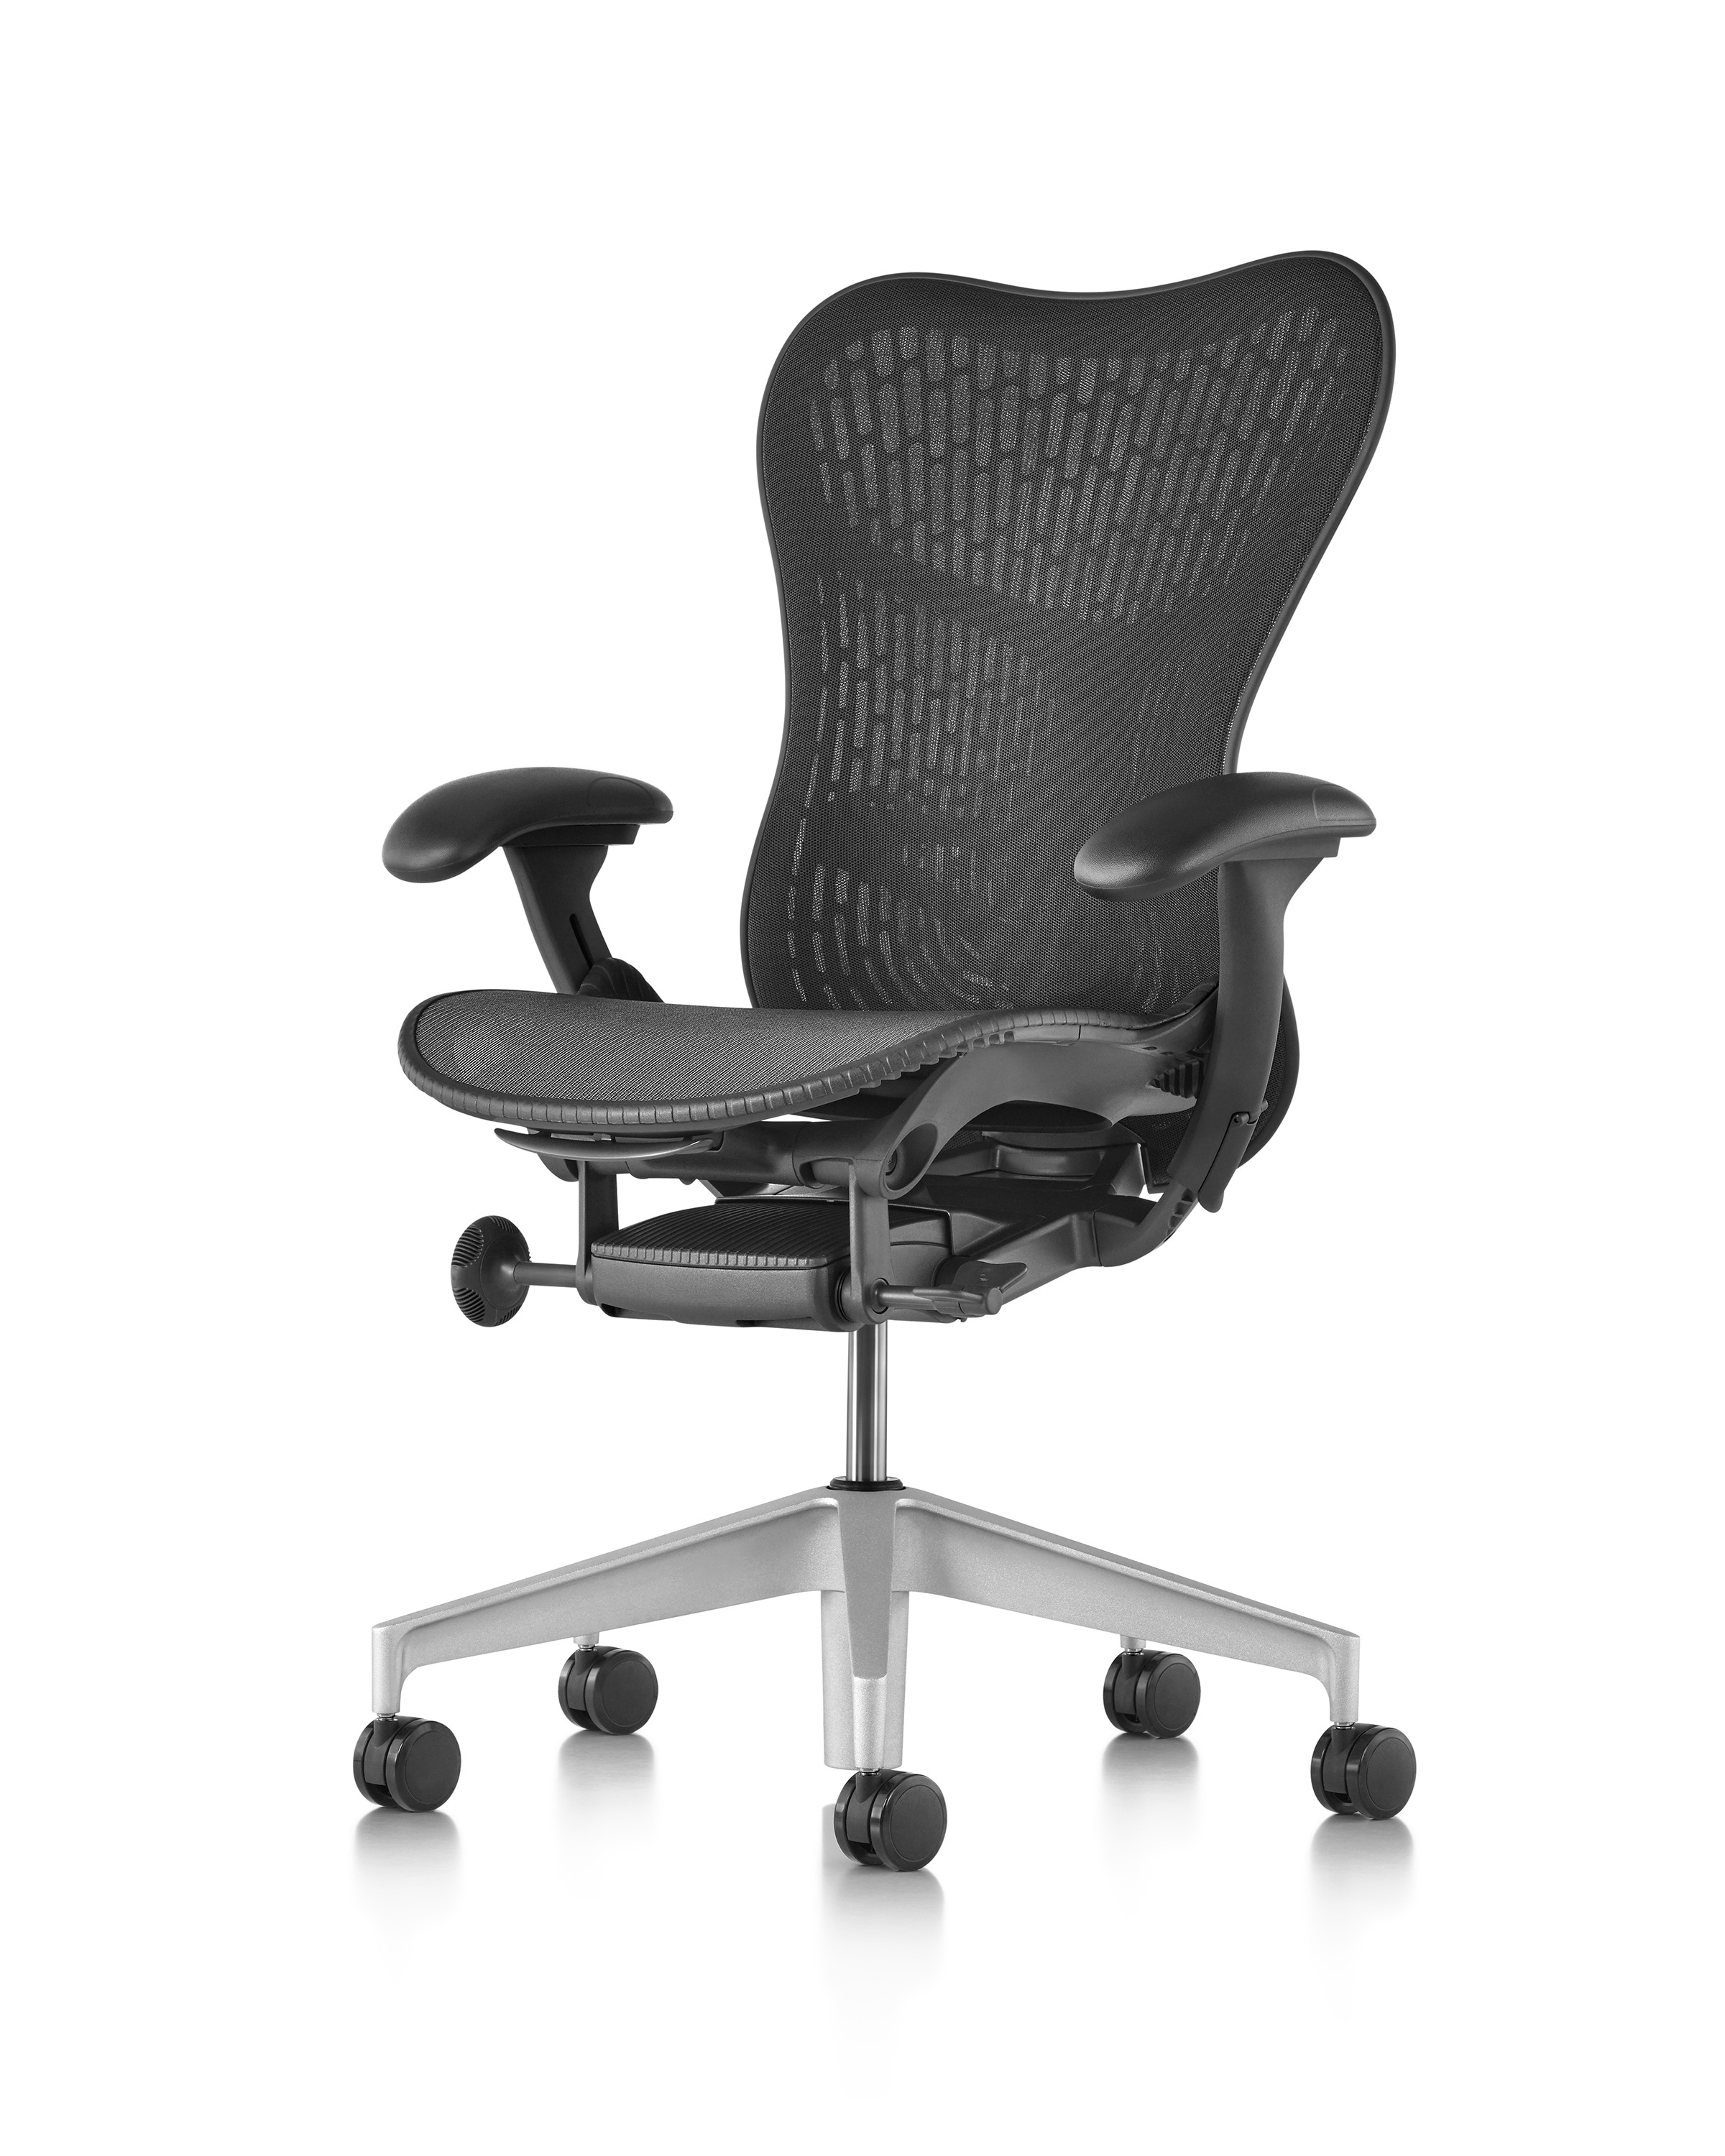 Mirra 2 Product Images - Office Chairs - Herman Miller